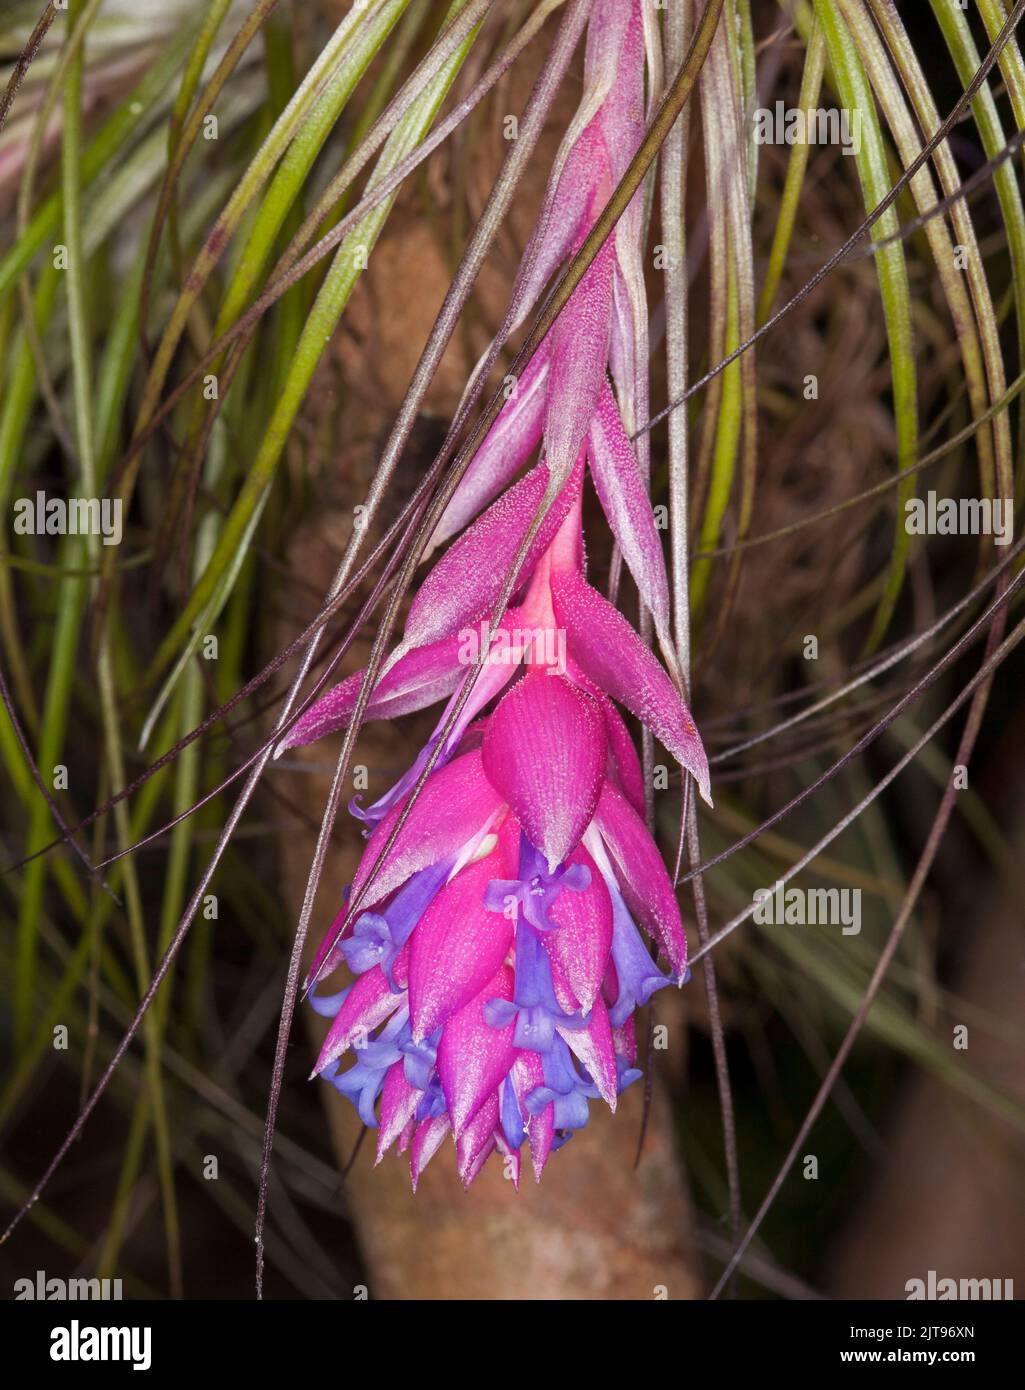 Beautiful vivid pink bracts and blue flowers of bromeliad, Tillandsia stricta, Air Plant, against background of grey / green leaves in Australia Stock Photo